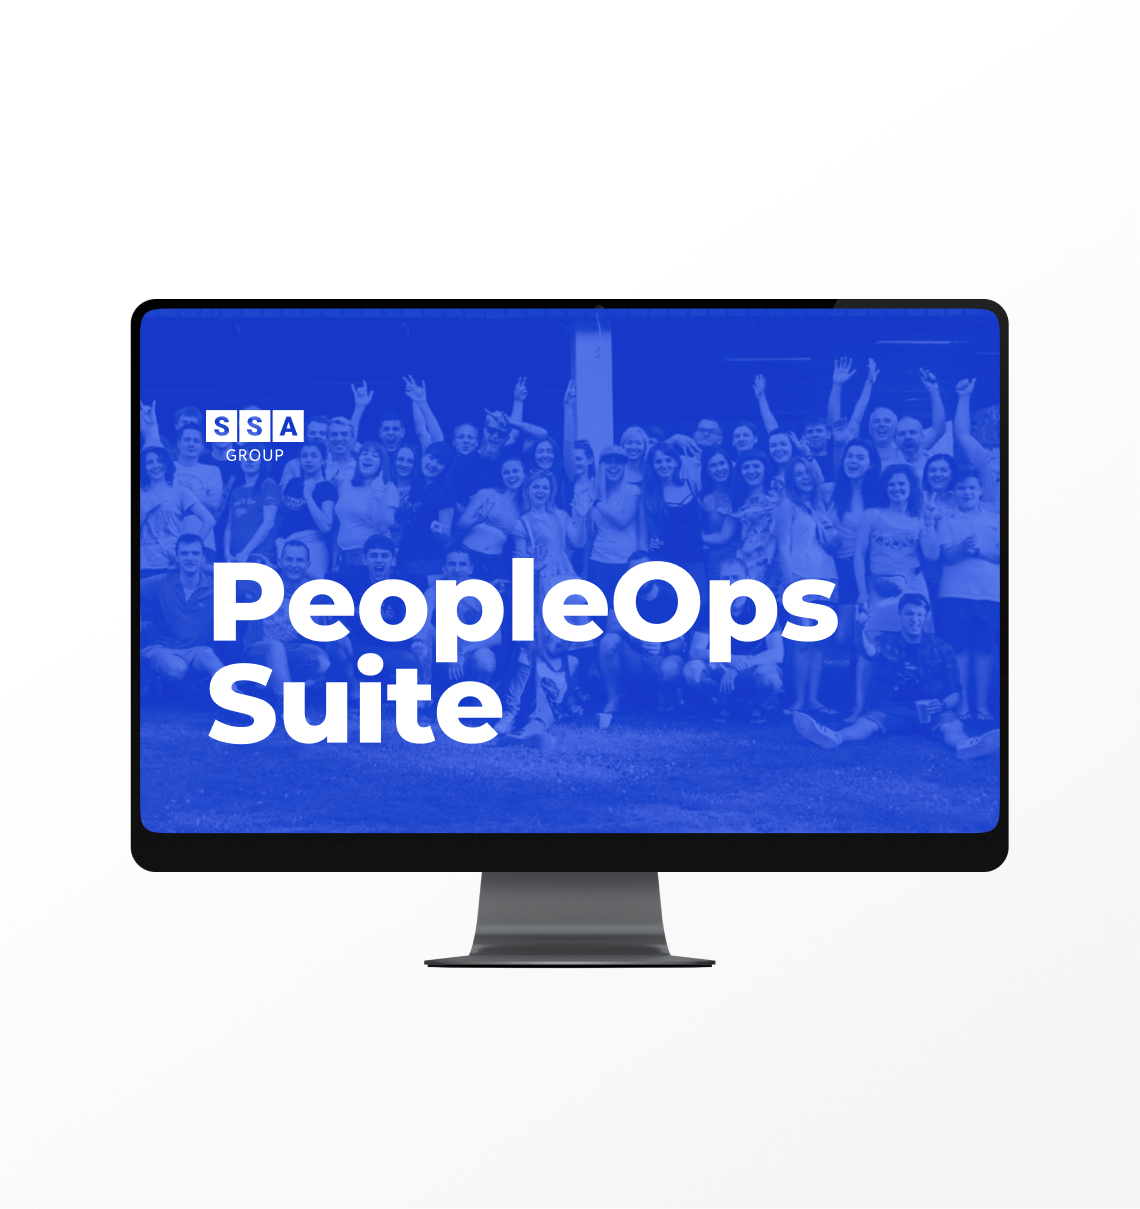 SSA Group releases a new product – PeopleOps Suite